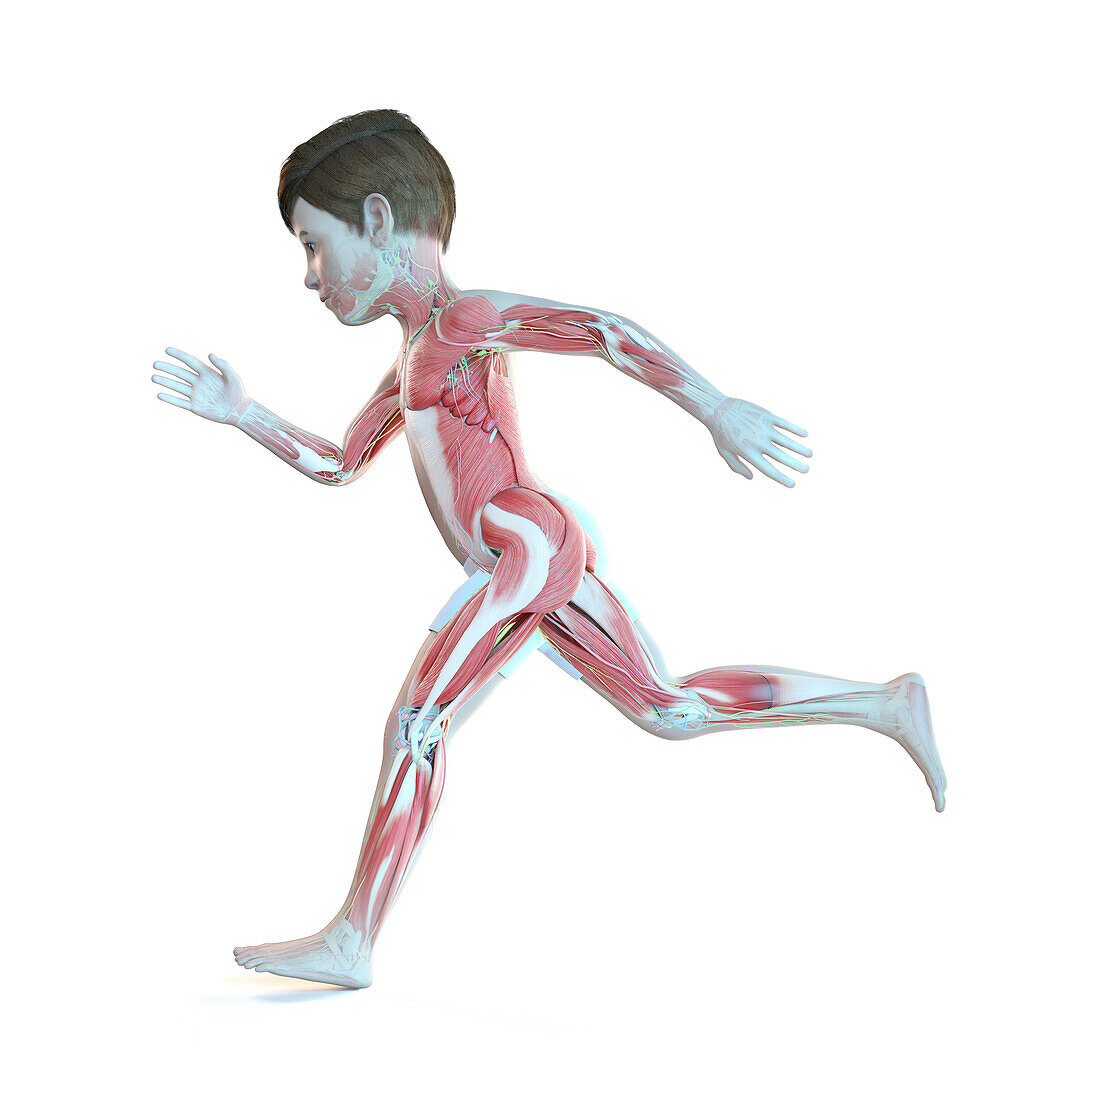 Illustration of a boy's muscles